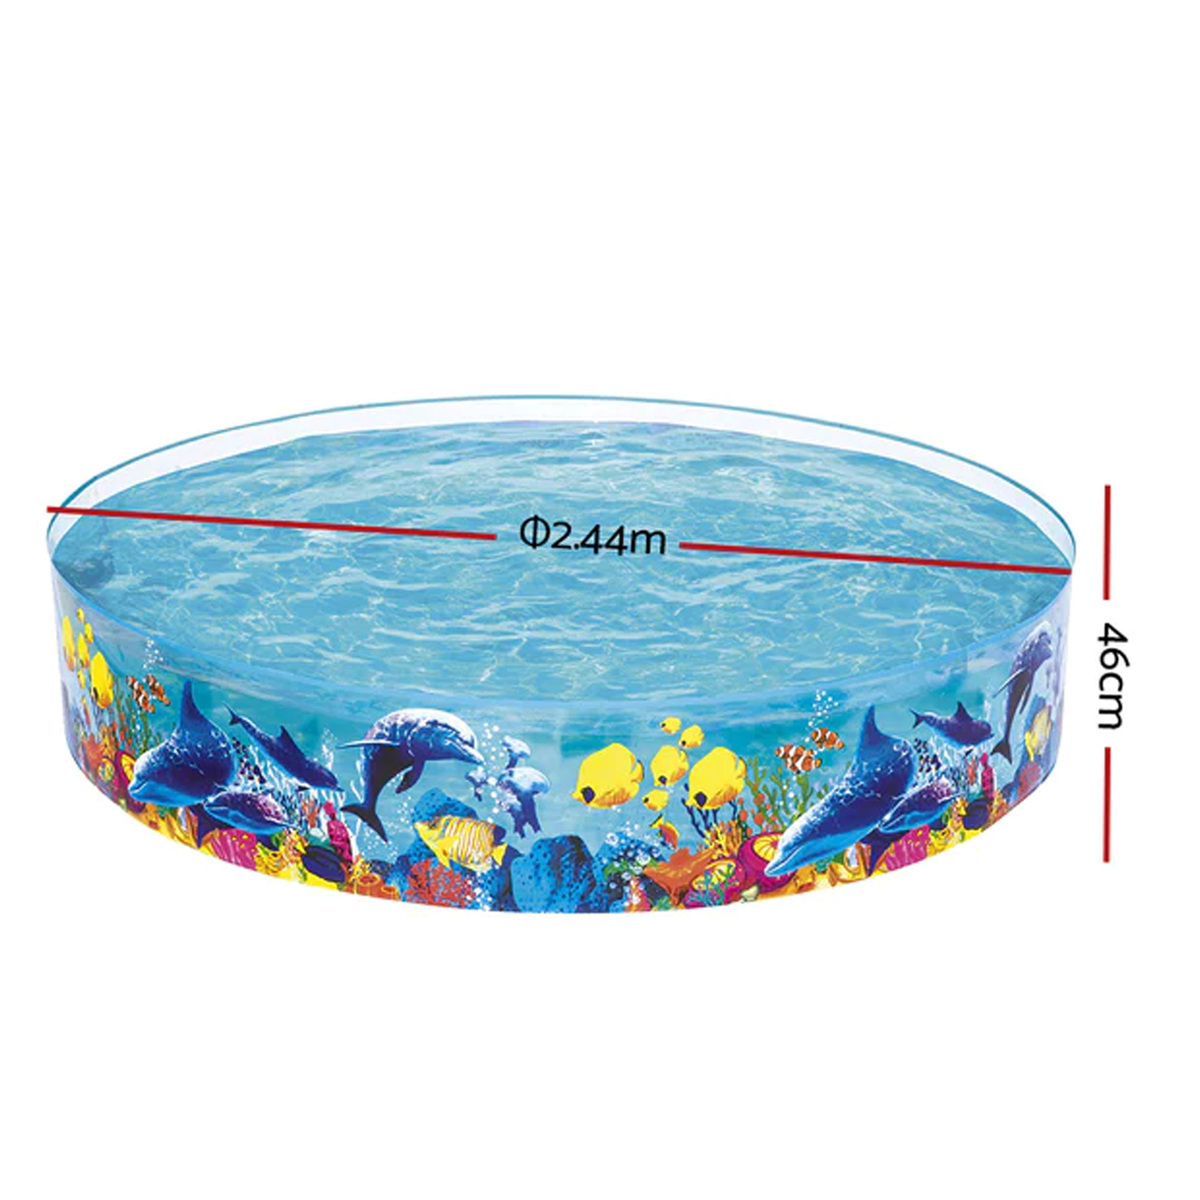 Bestway Swimming Pool Fun Odyssey Above Ground Kids Play Inflatable Round Pools55031